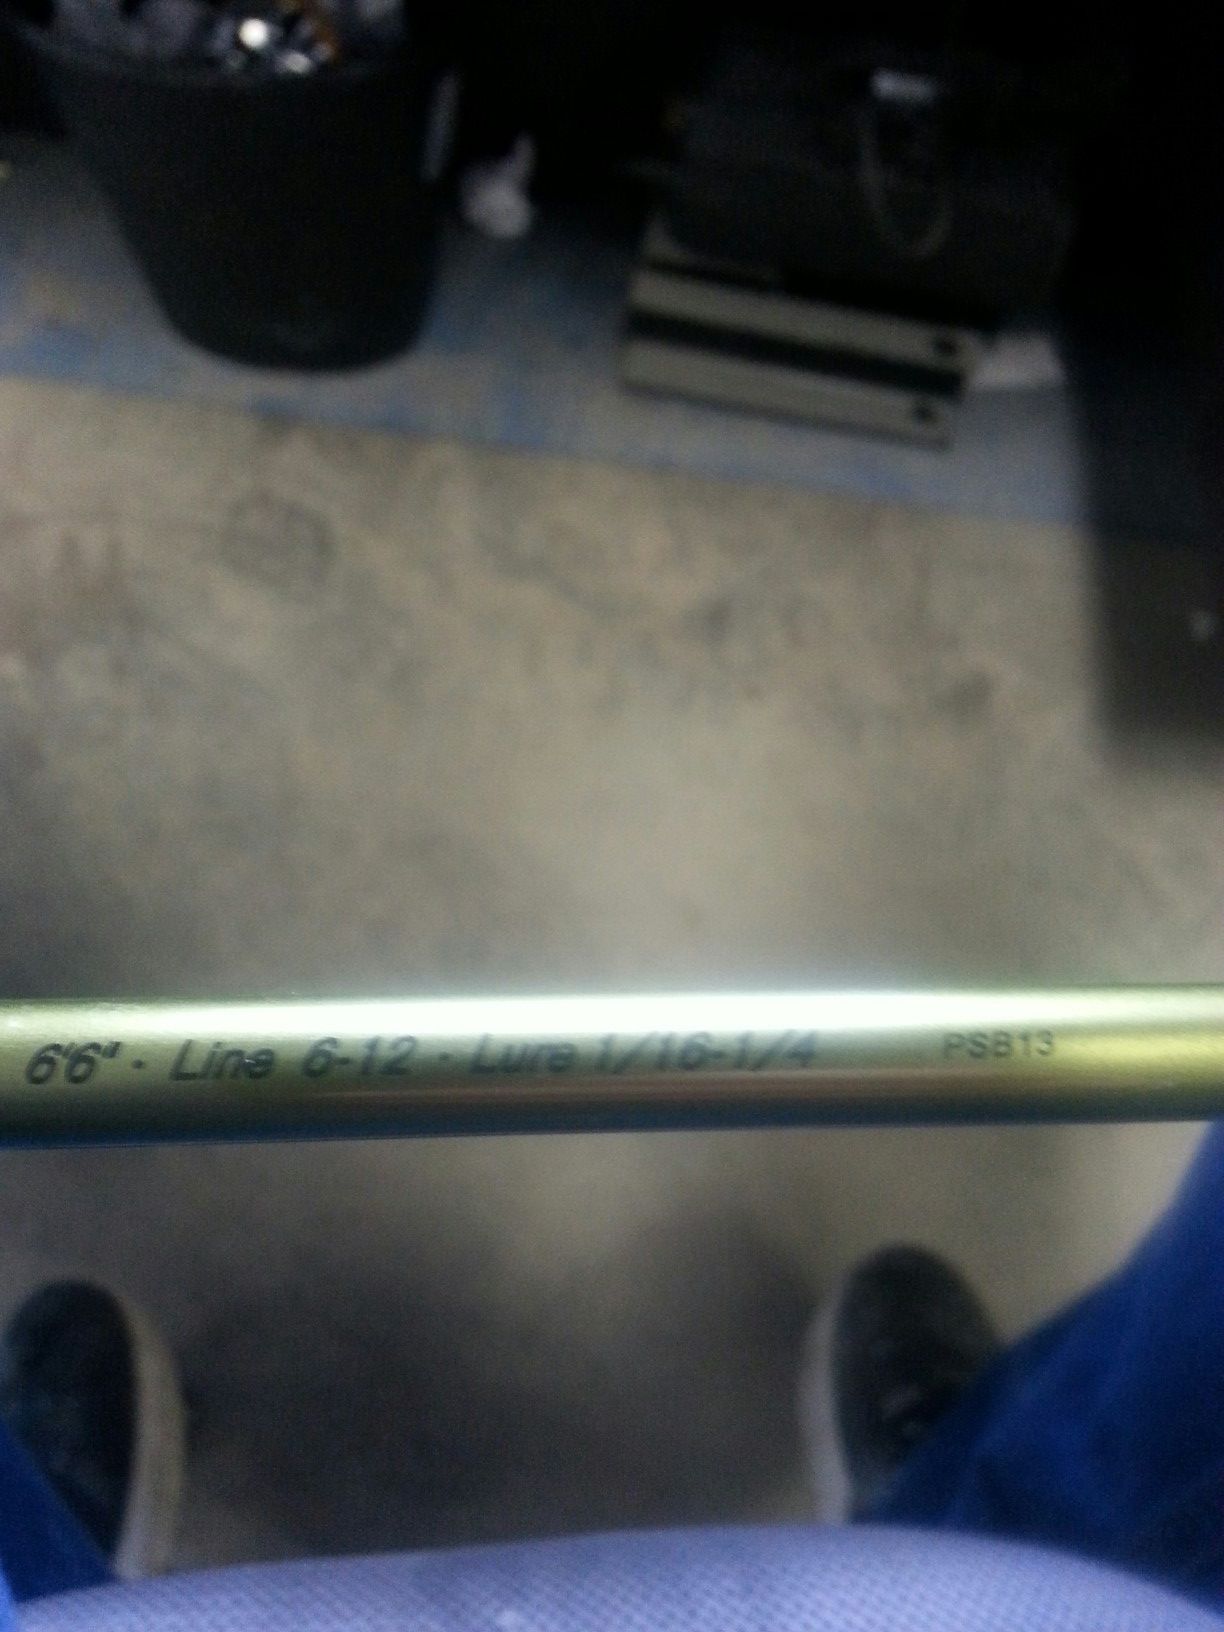 FTU The Green Rod Spinning Rod for Sale in Pasadena, TX - OfferUp